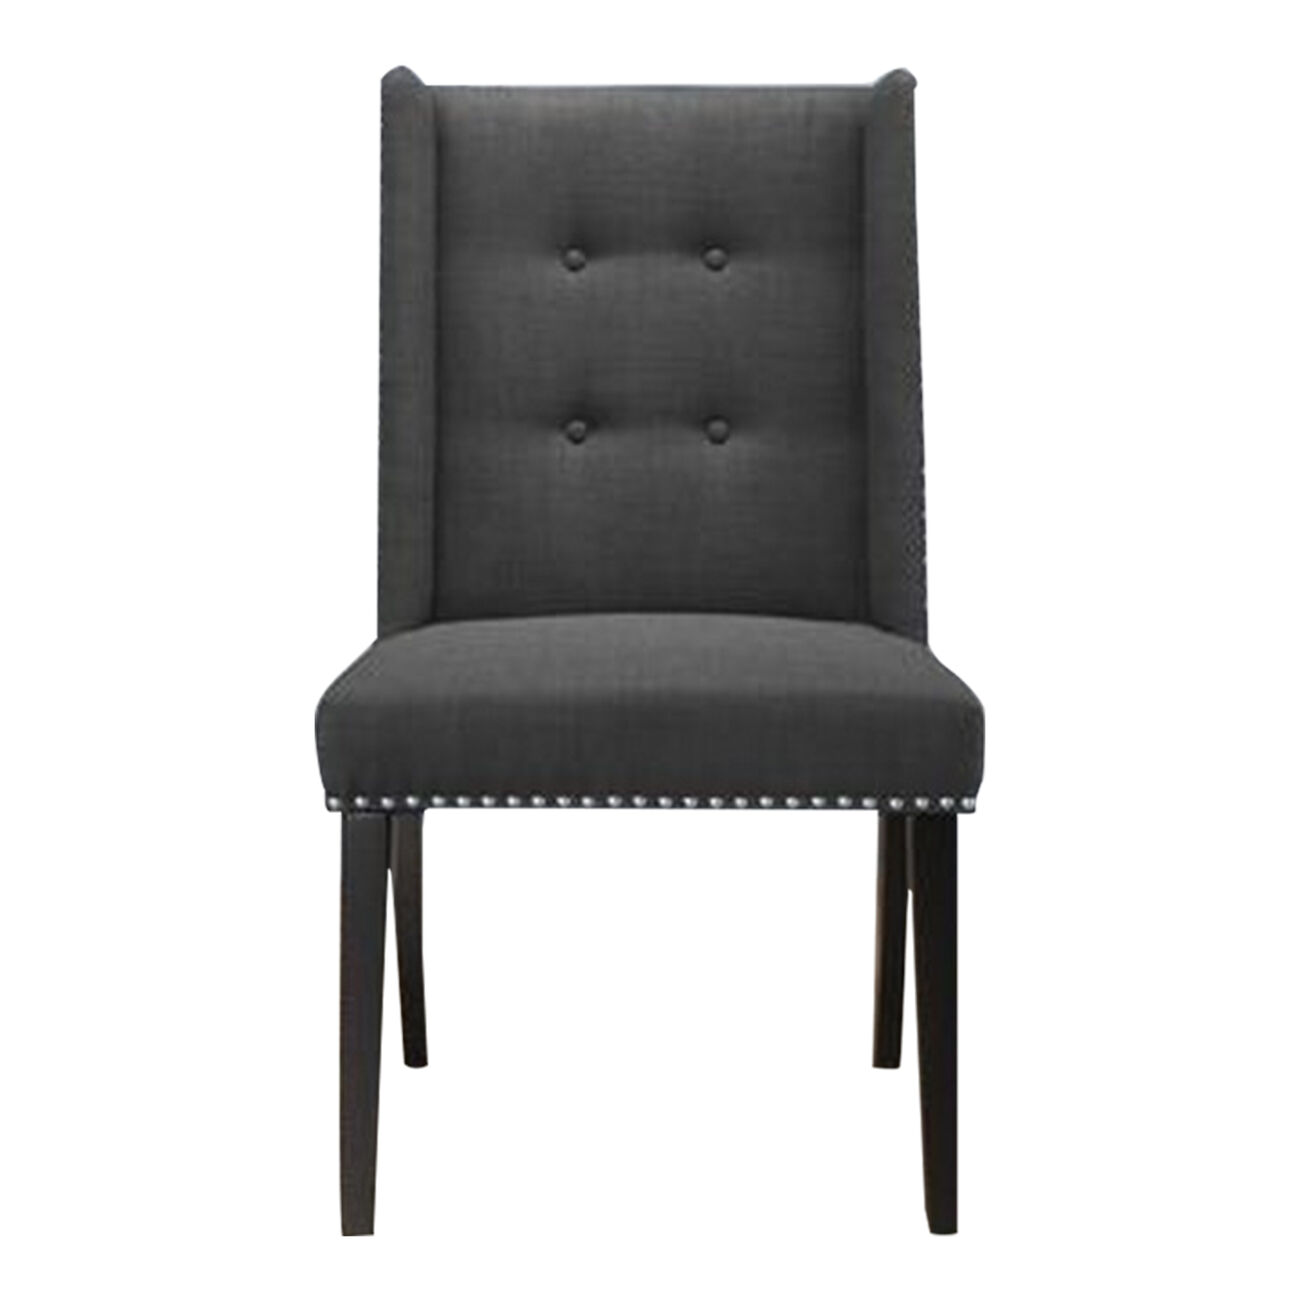 Button Tufted Fabric Dining Chair with Nailhead Trim, Set of 2, Dark Gray - BM229097